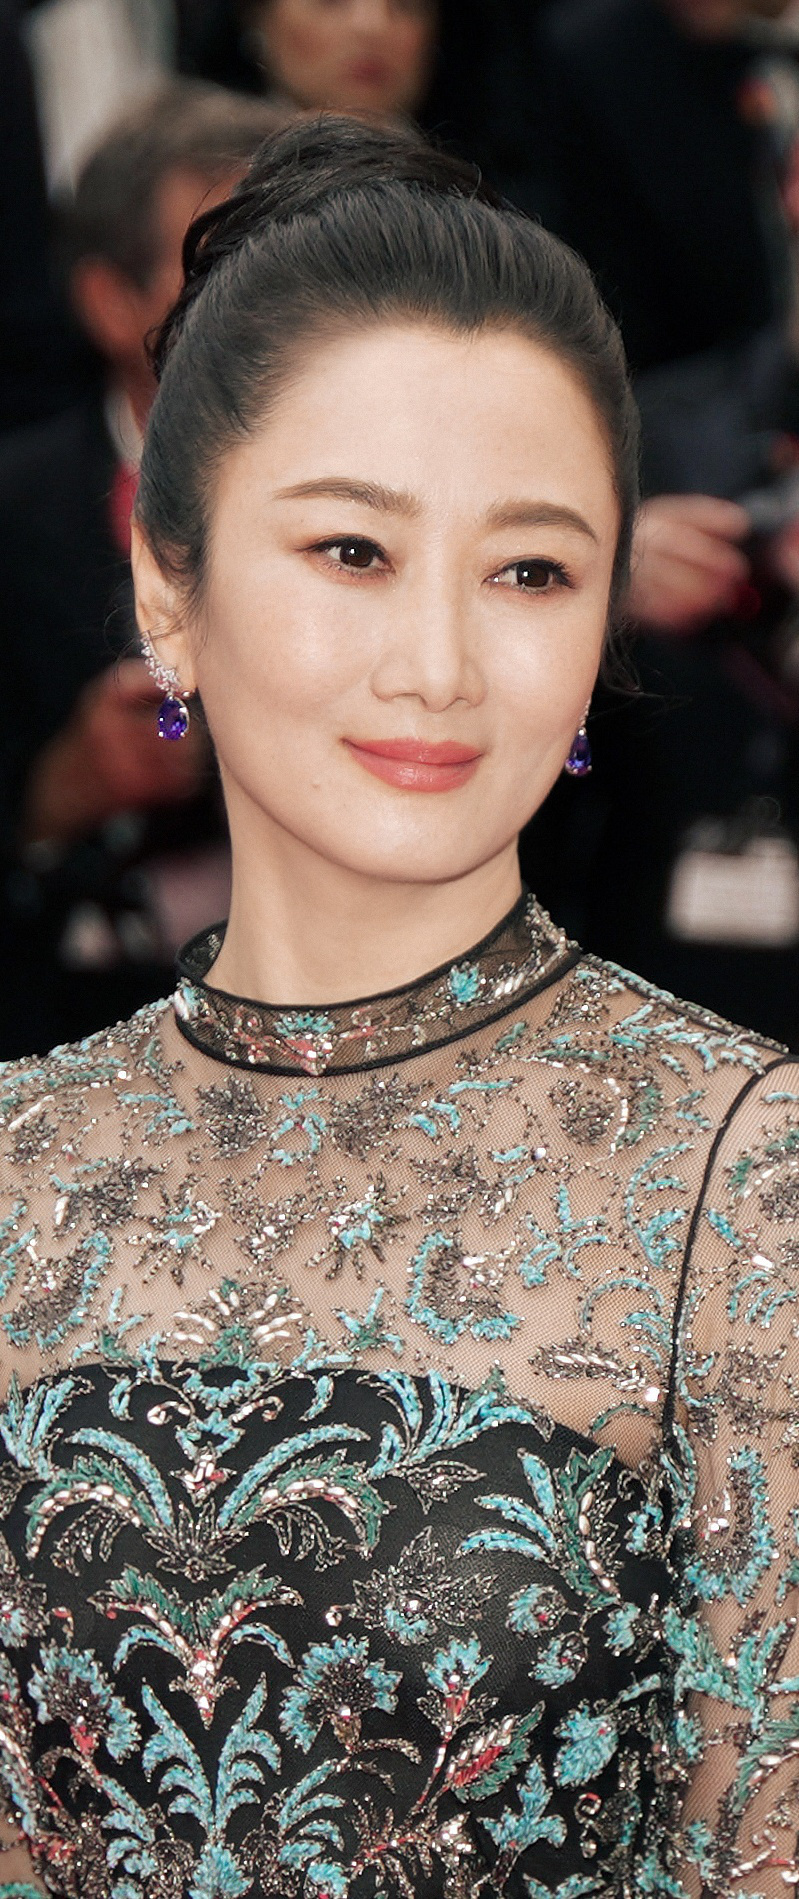  Zhao Tao: As an actor, the character always comes first